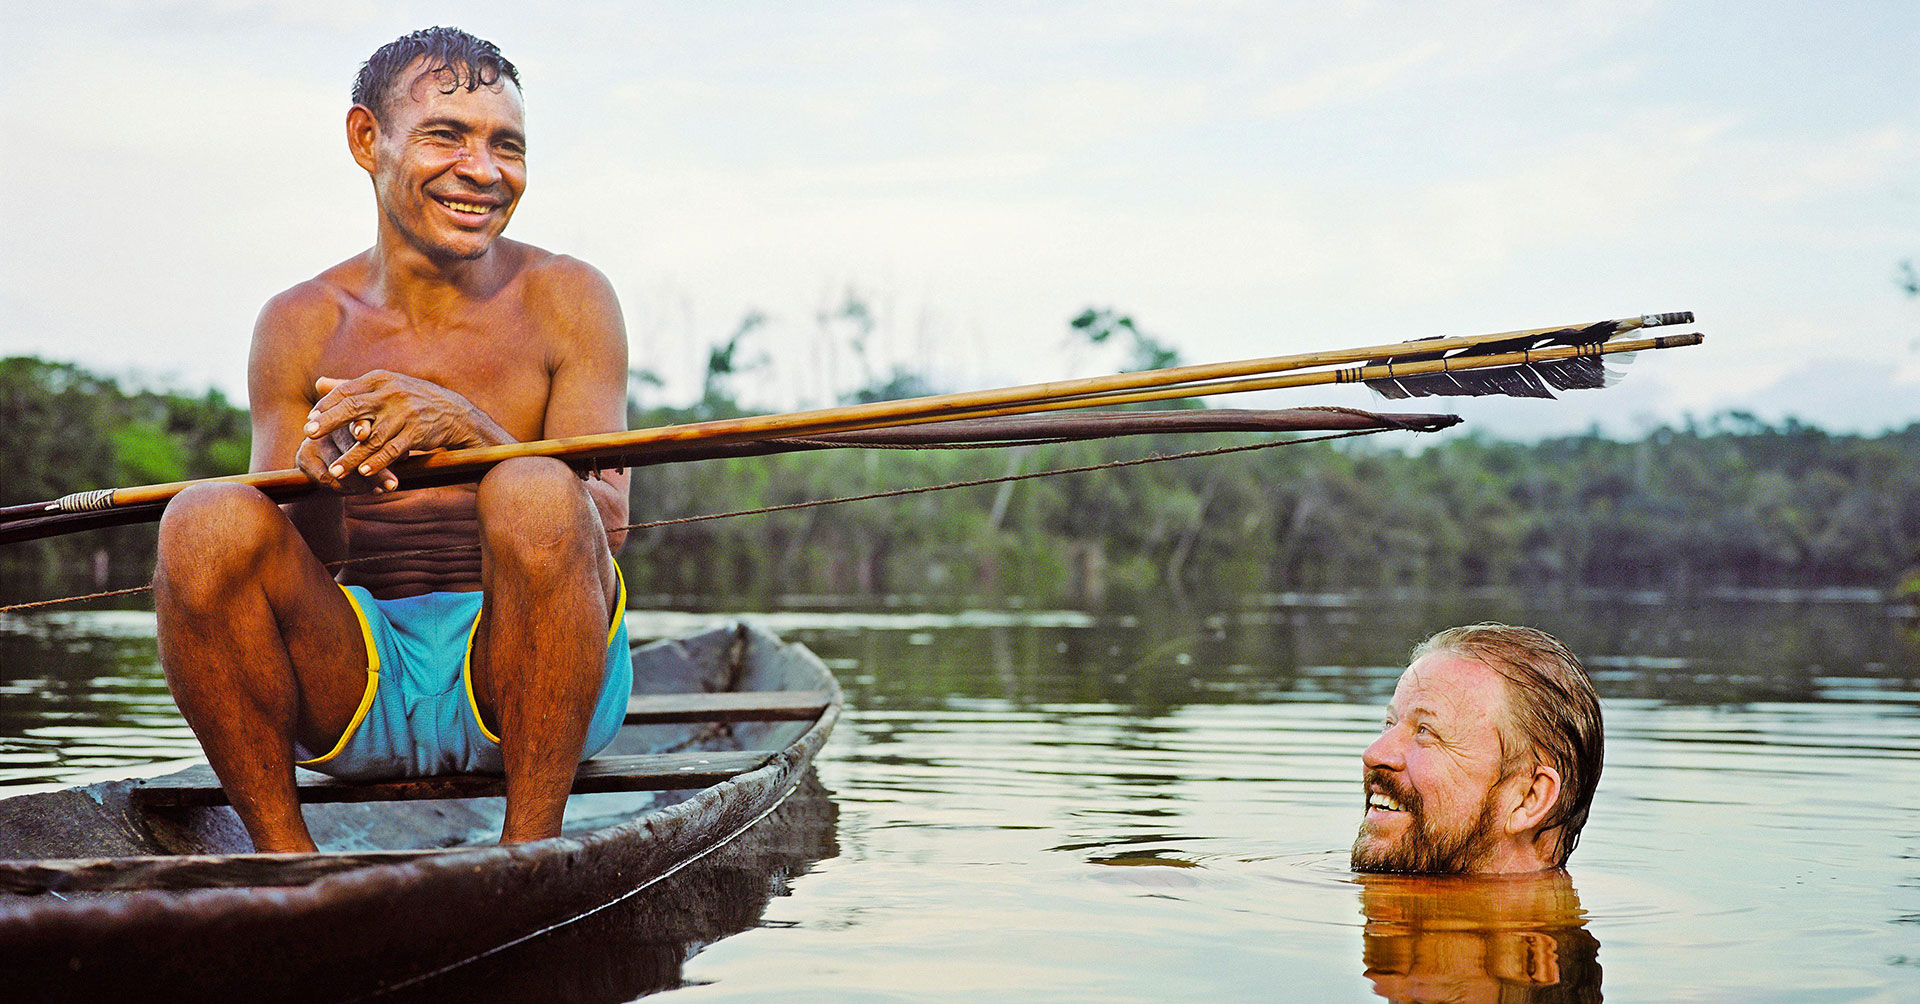 Daniel Everett, right, learnt the language of the remote Piraha tribe while living with them in the Amazon rainforest MARTIN SCHOELLER